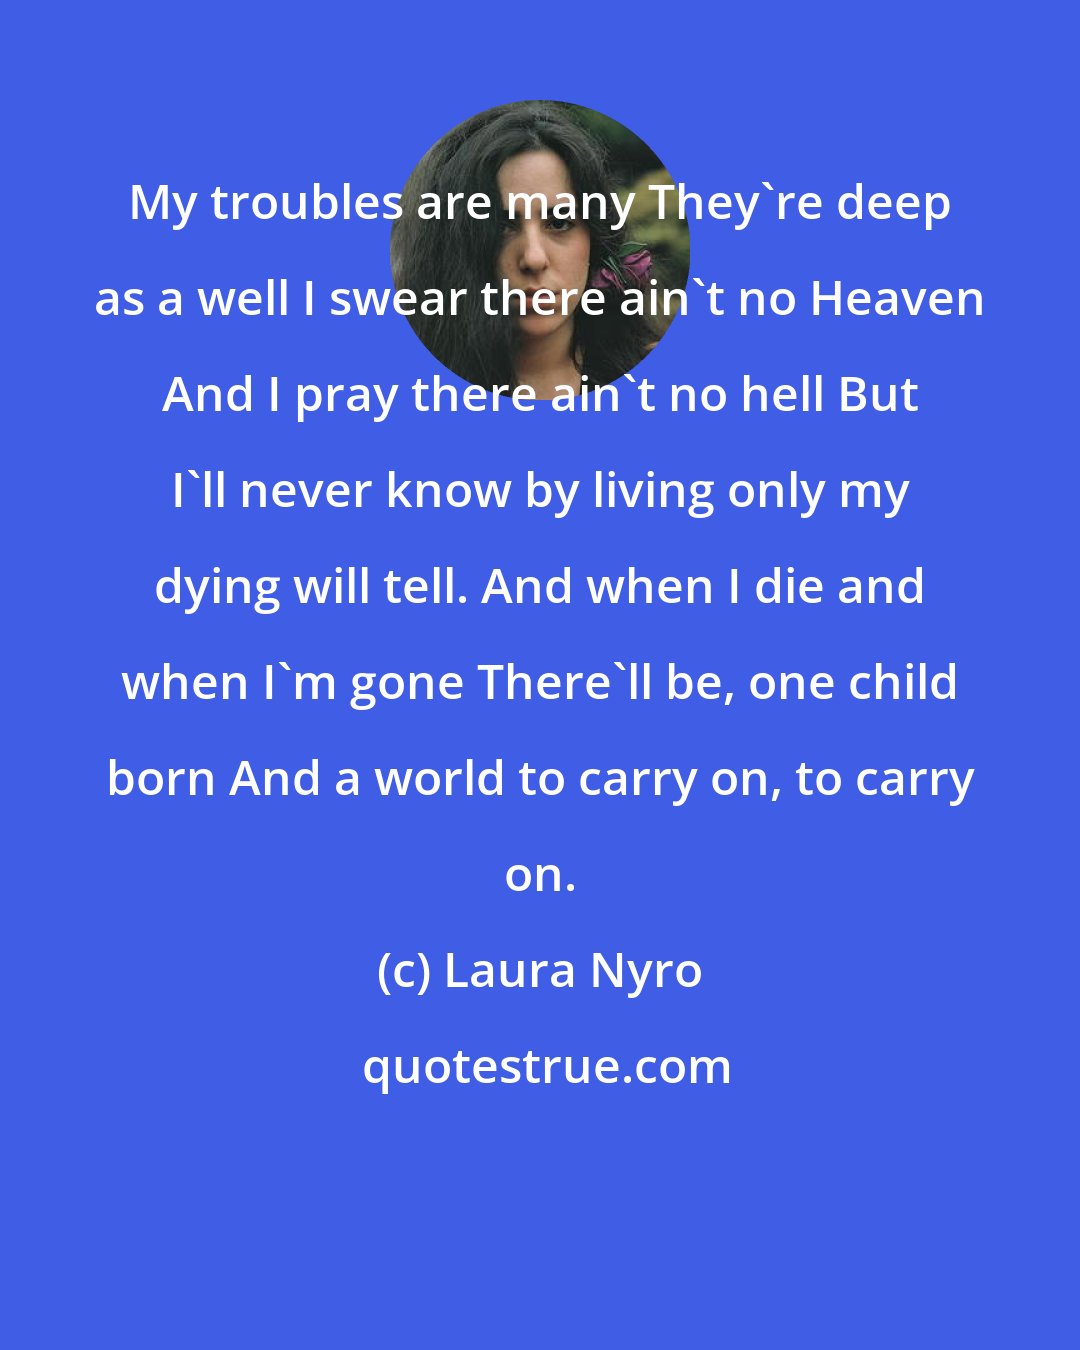 Laura Nyro: My troubles are many They're deep as a well I swear there ain't no Heaven And I pray there ain't no hell But I'll never know by living only my dying will tell. And when I die and when I'm gone There'll be, one child born And a world to carry on, to carry on.